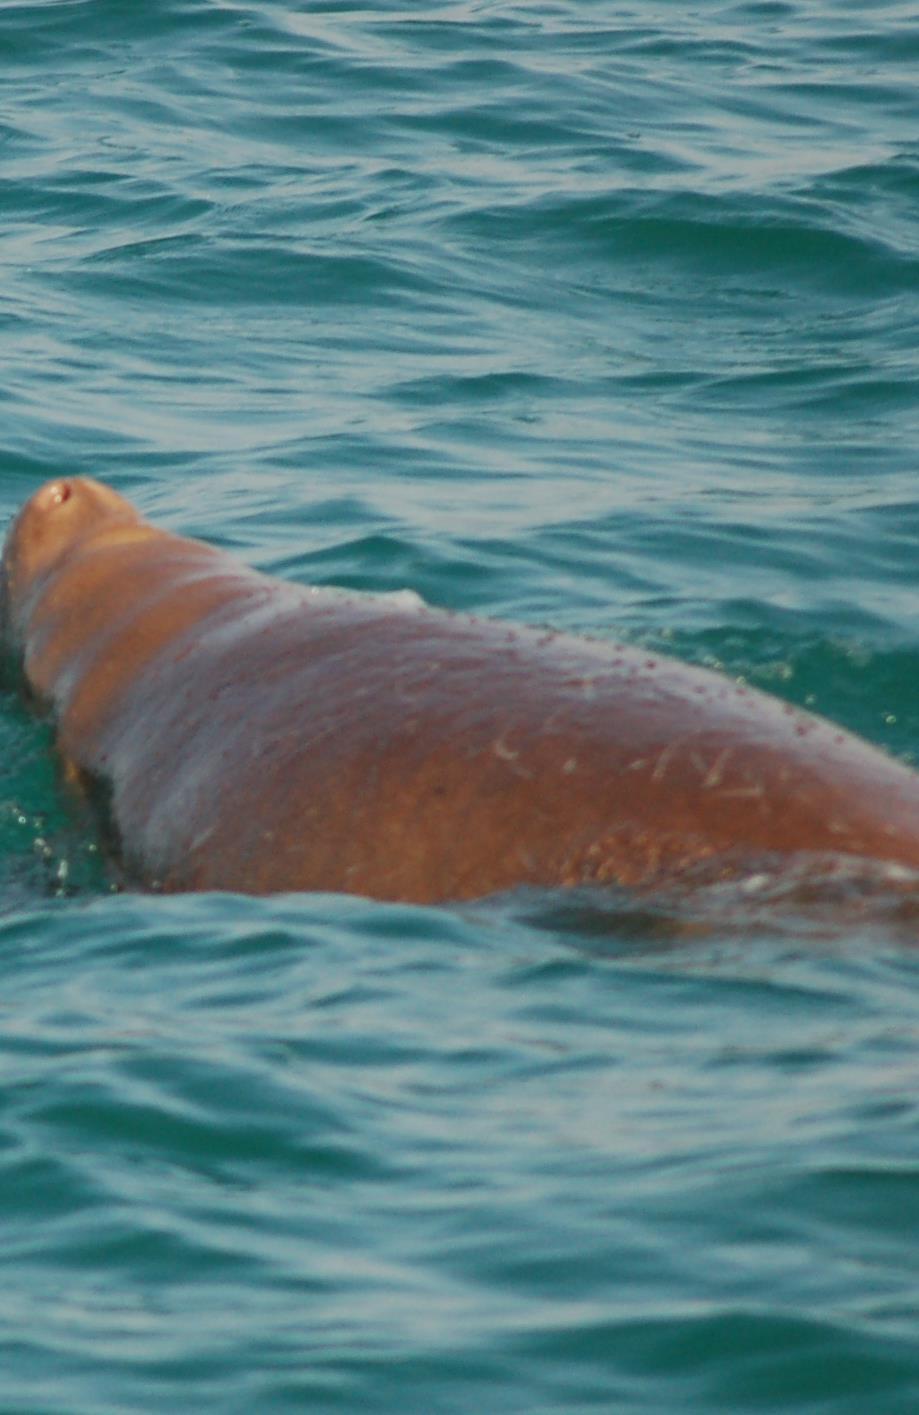 IN THE PAST. Reportedly 60-70 dugongs are brought into Abu Dhabi fish market Annually - Prof. Colin Betram of St.